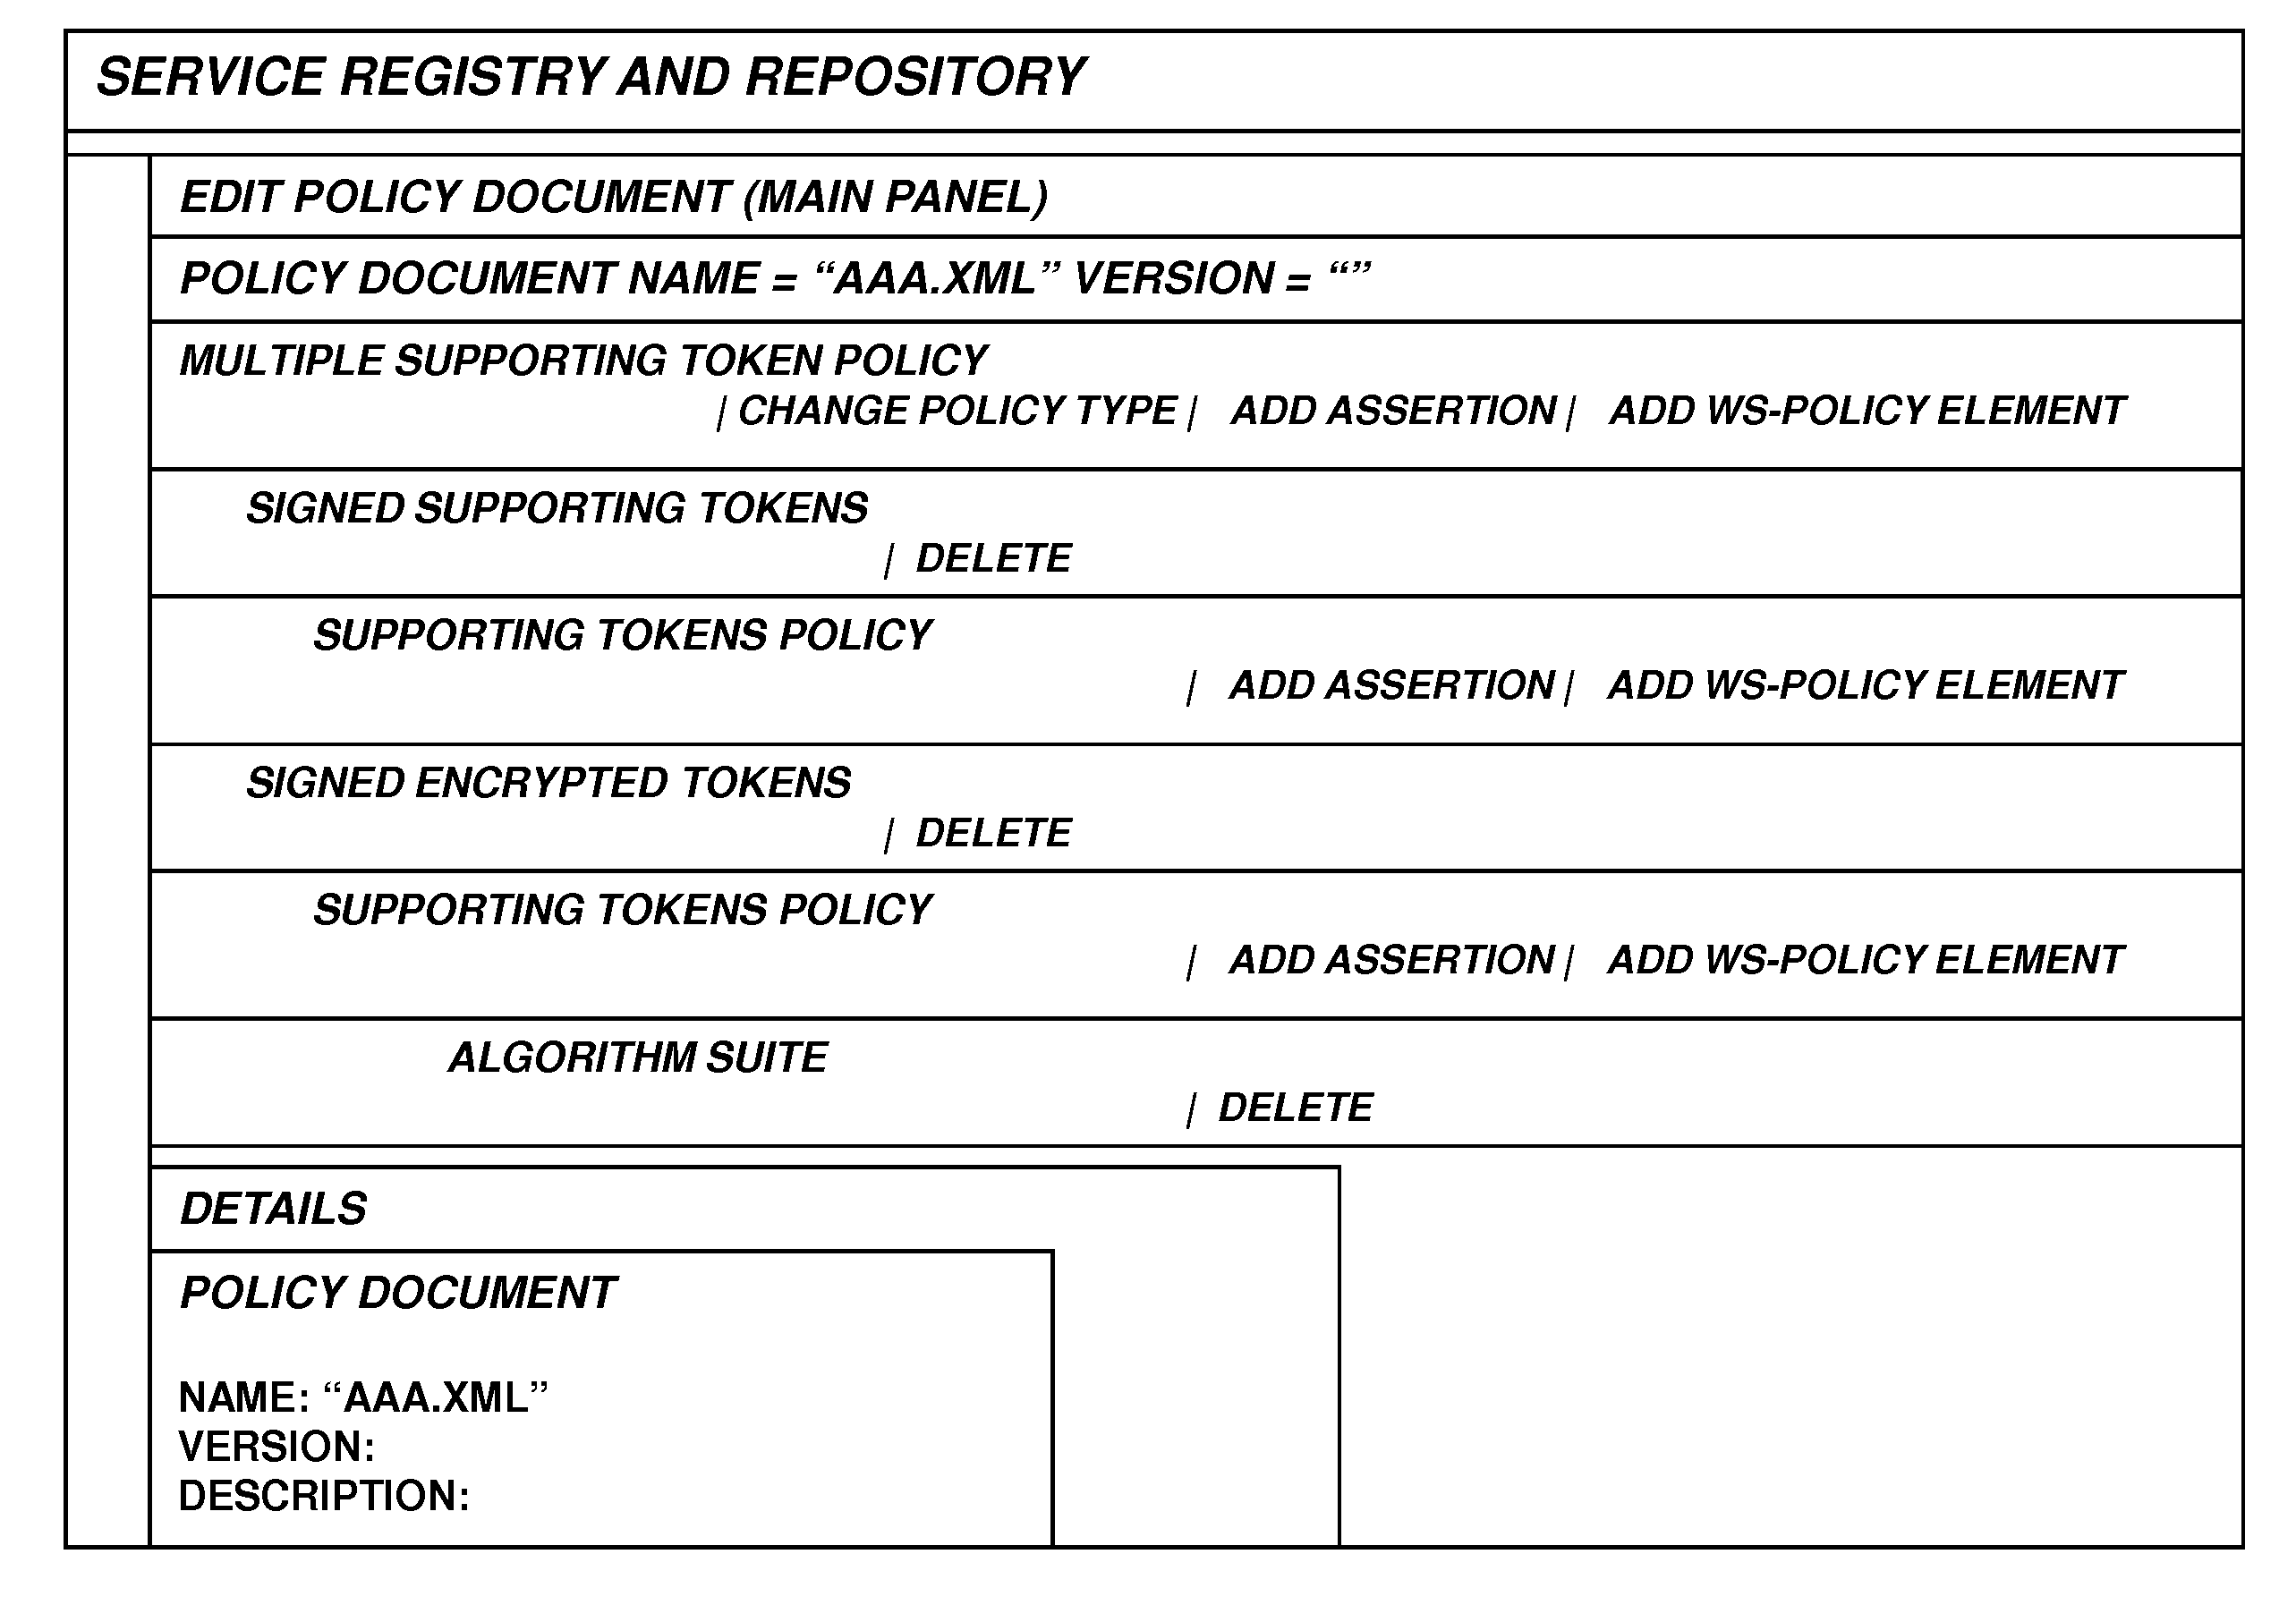 Service registry policy editing user interface